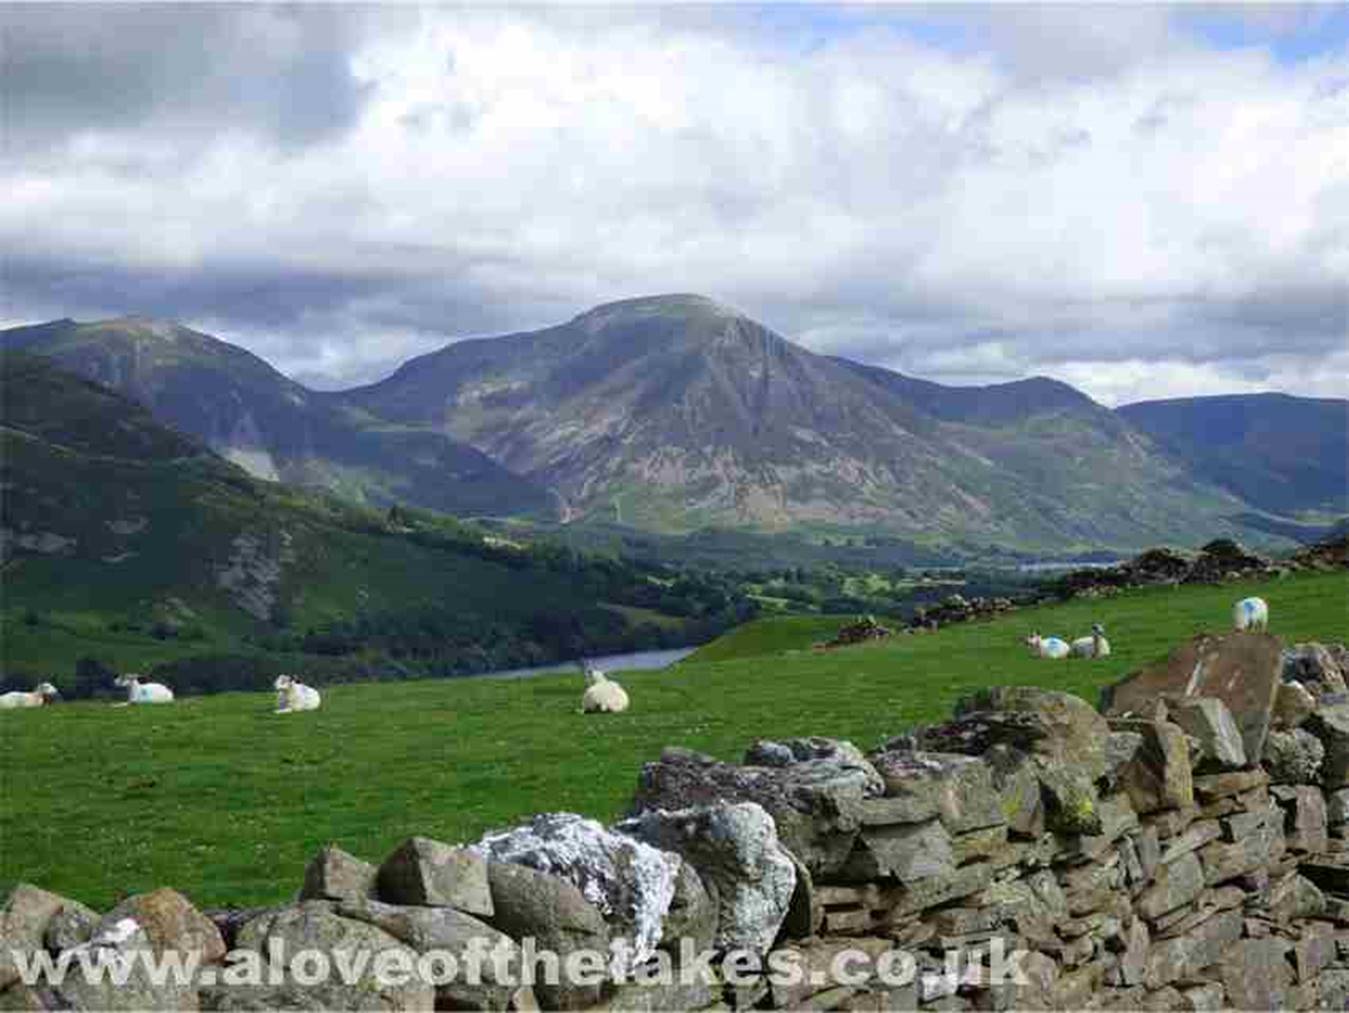 An early view across Crummock water of Whiteside and Grasmoor